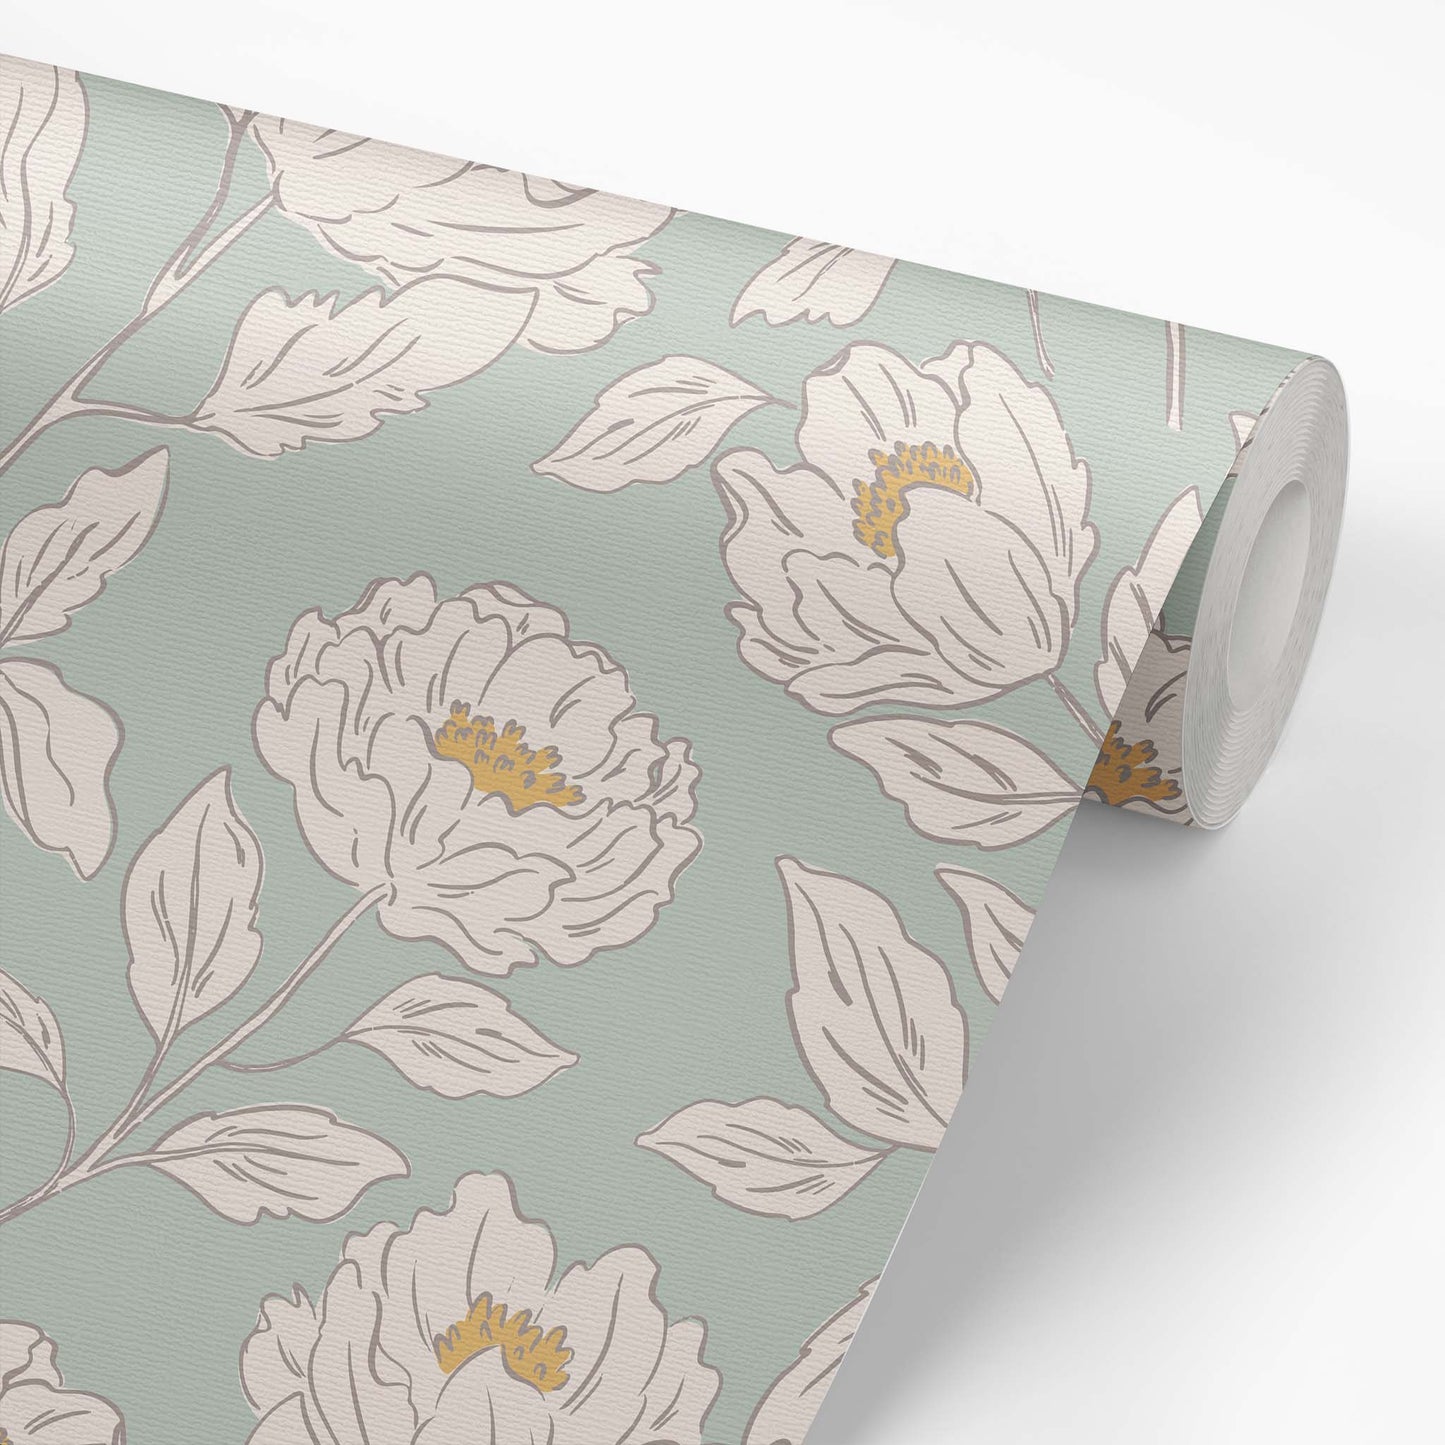 Wallpaper Roll featuring Floral Toile Peel and Stick, Removable Wallpaper in Sage